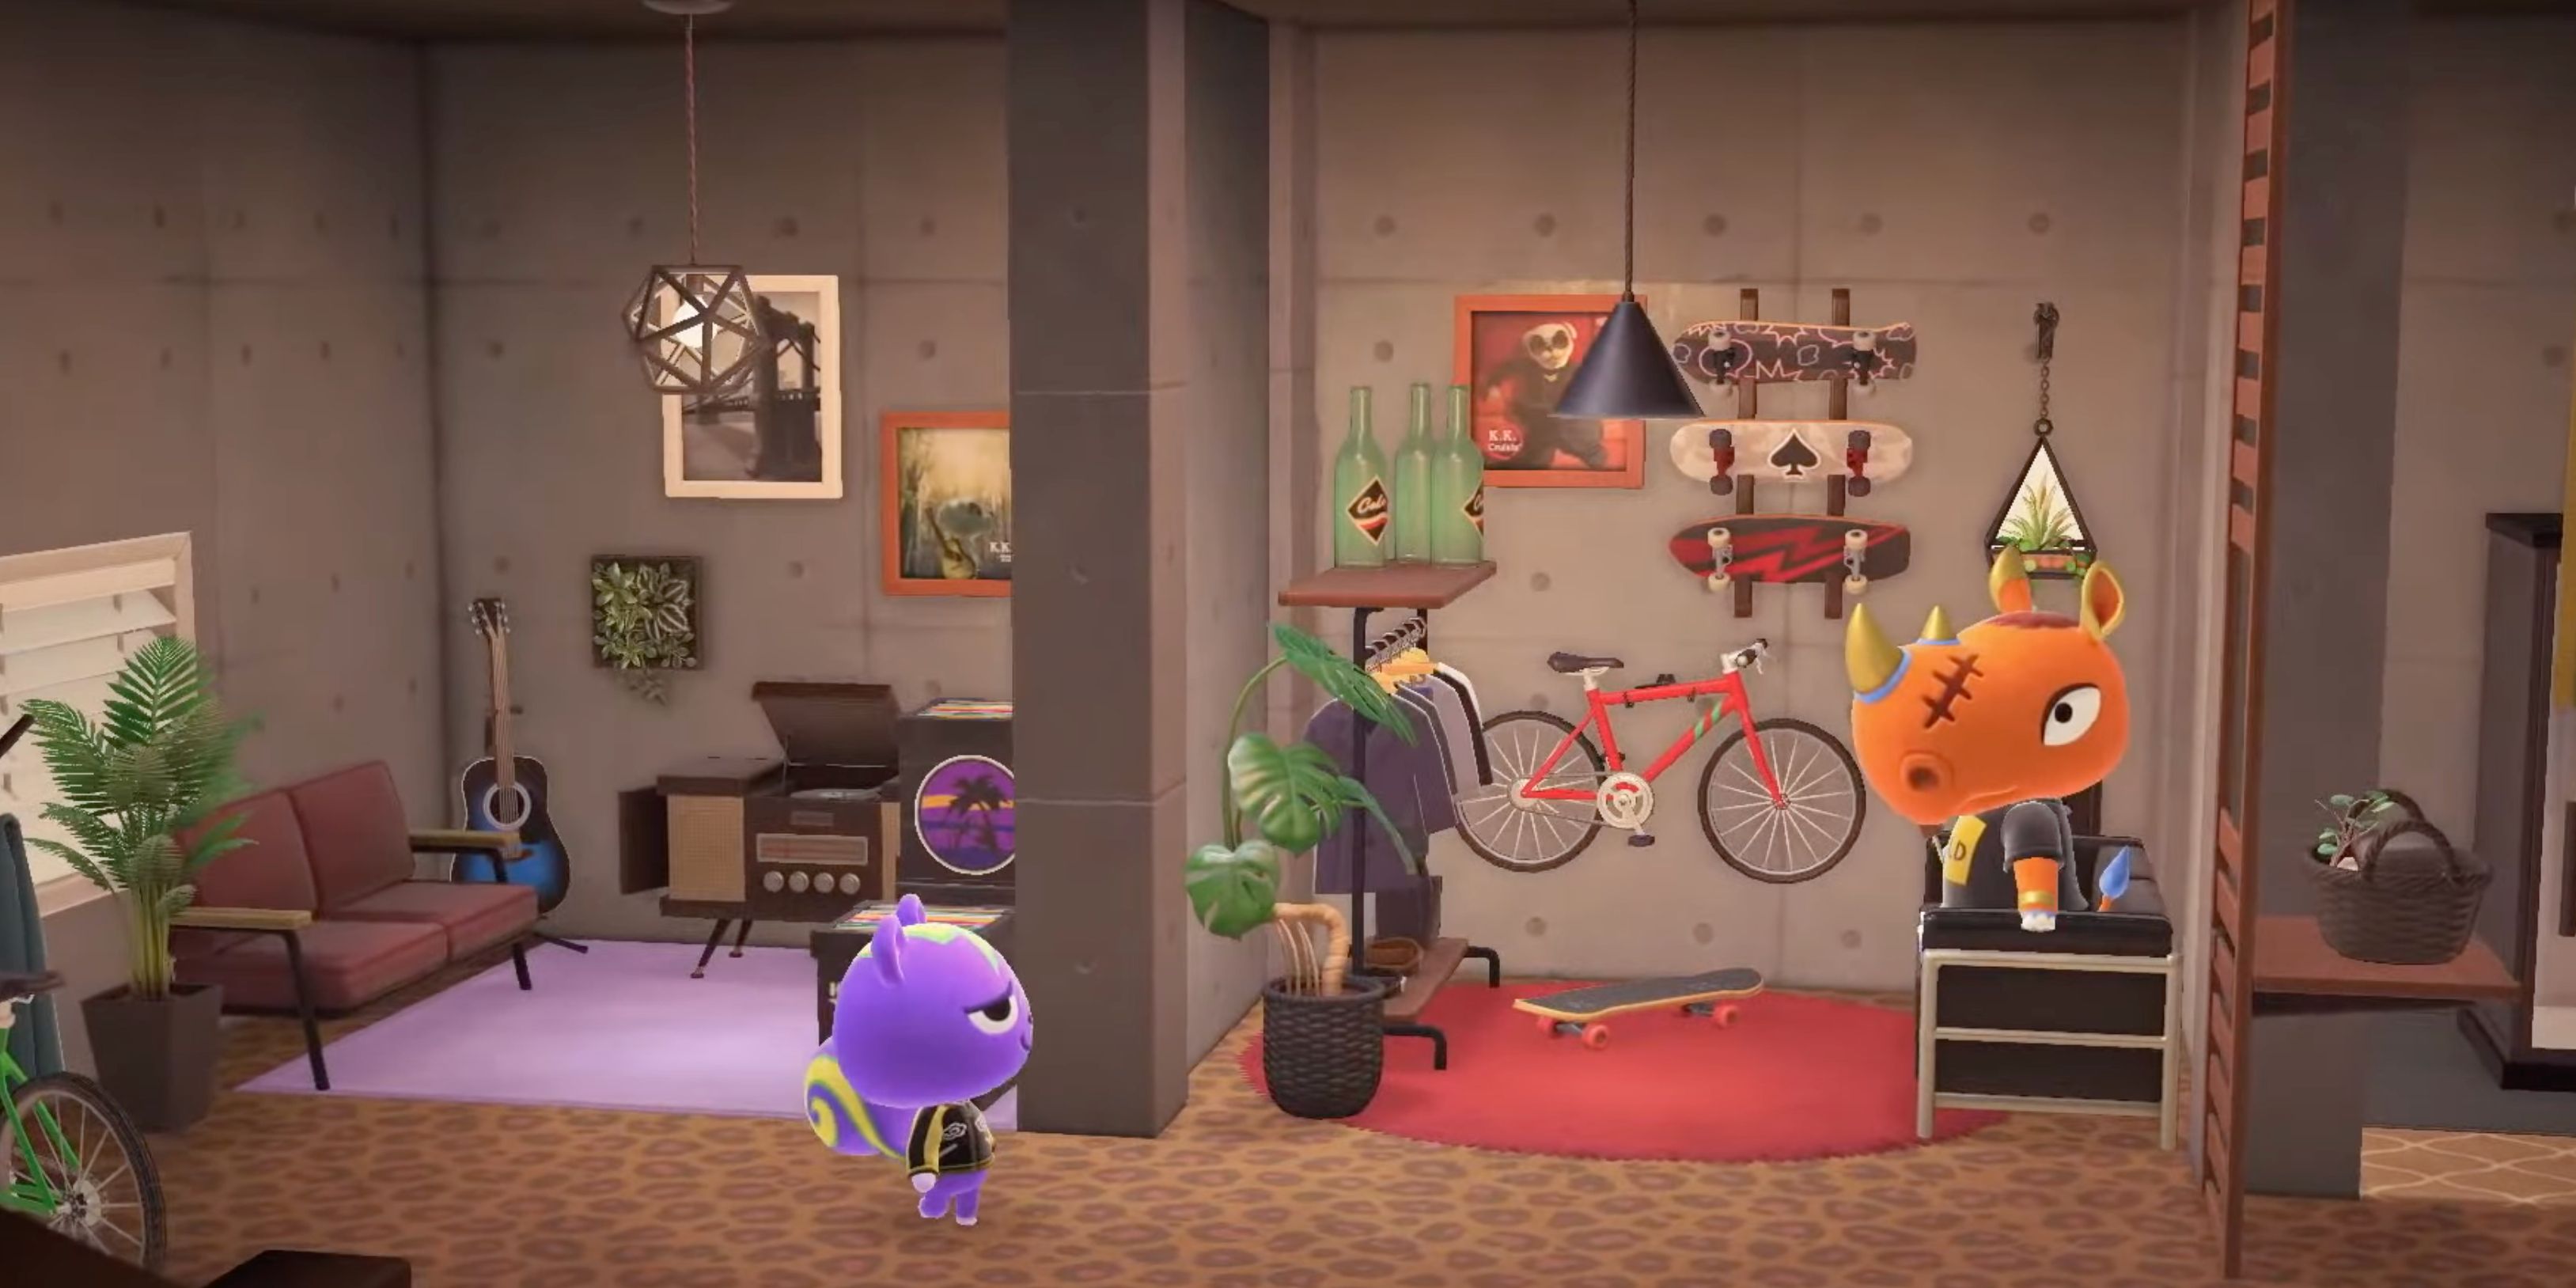 Two Animal Crossing characters are standing in a room with custom-made wall partitions so they look like roommates